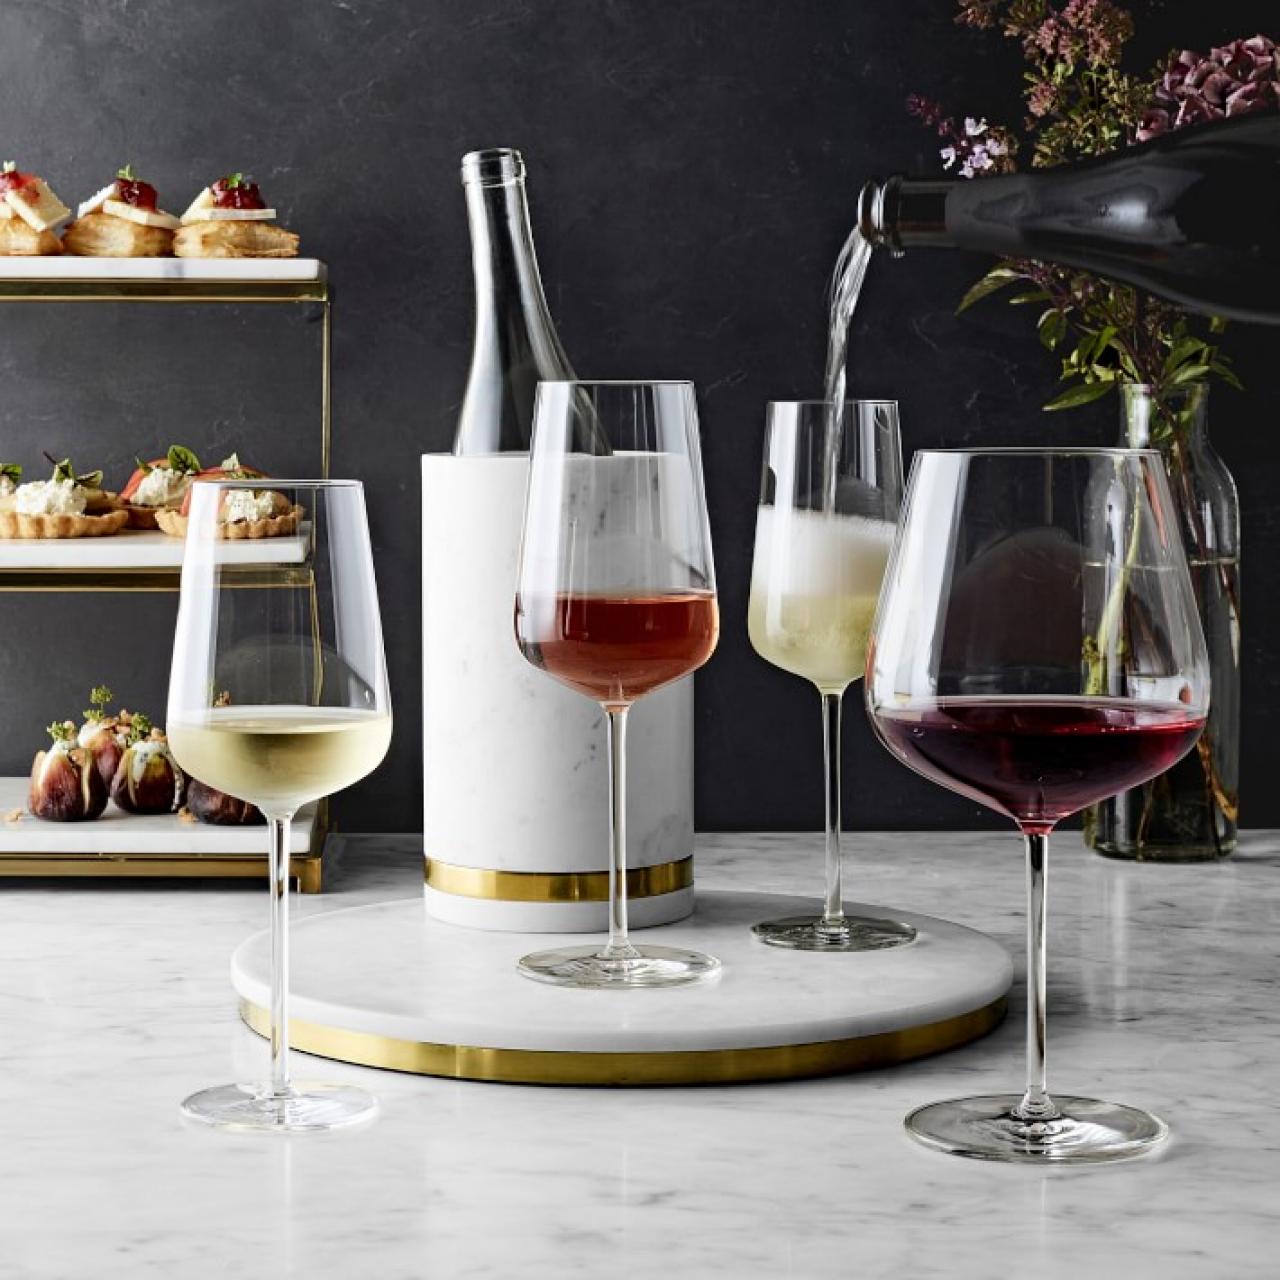 https://food.fnr.sndimg.com/content/dam/images/food/products/2021/11/4/rx_williams-sonoma-burgundy-glasses.jpg.rend.hgtvcom.1280.1280.suffix/1636039511852.jpeg